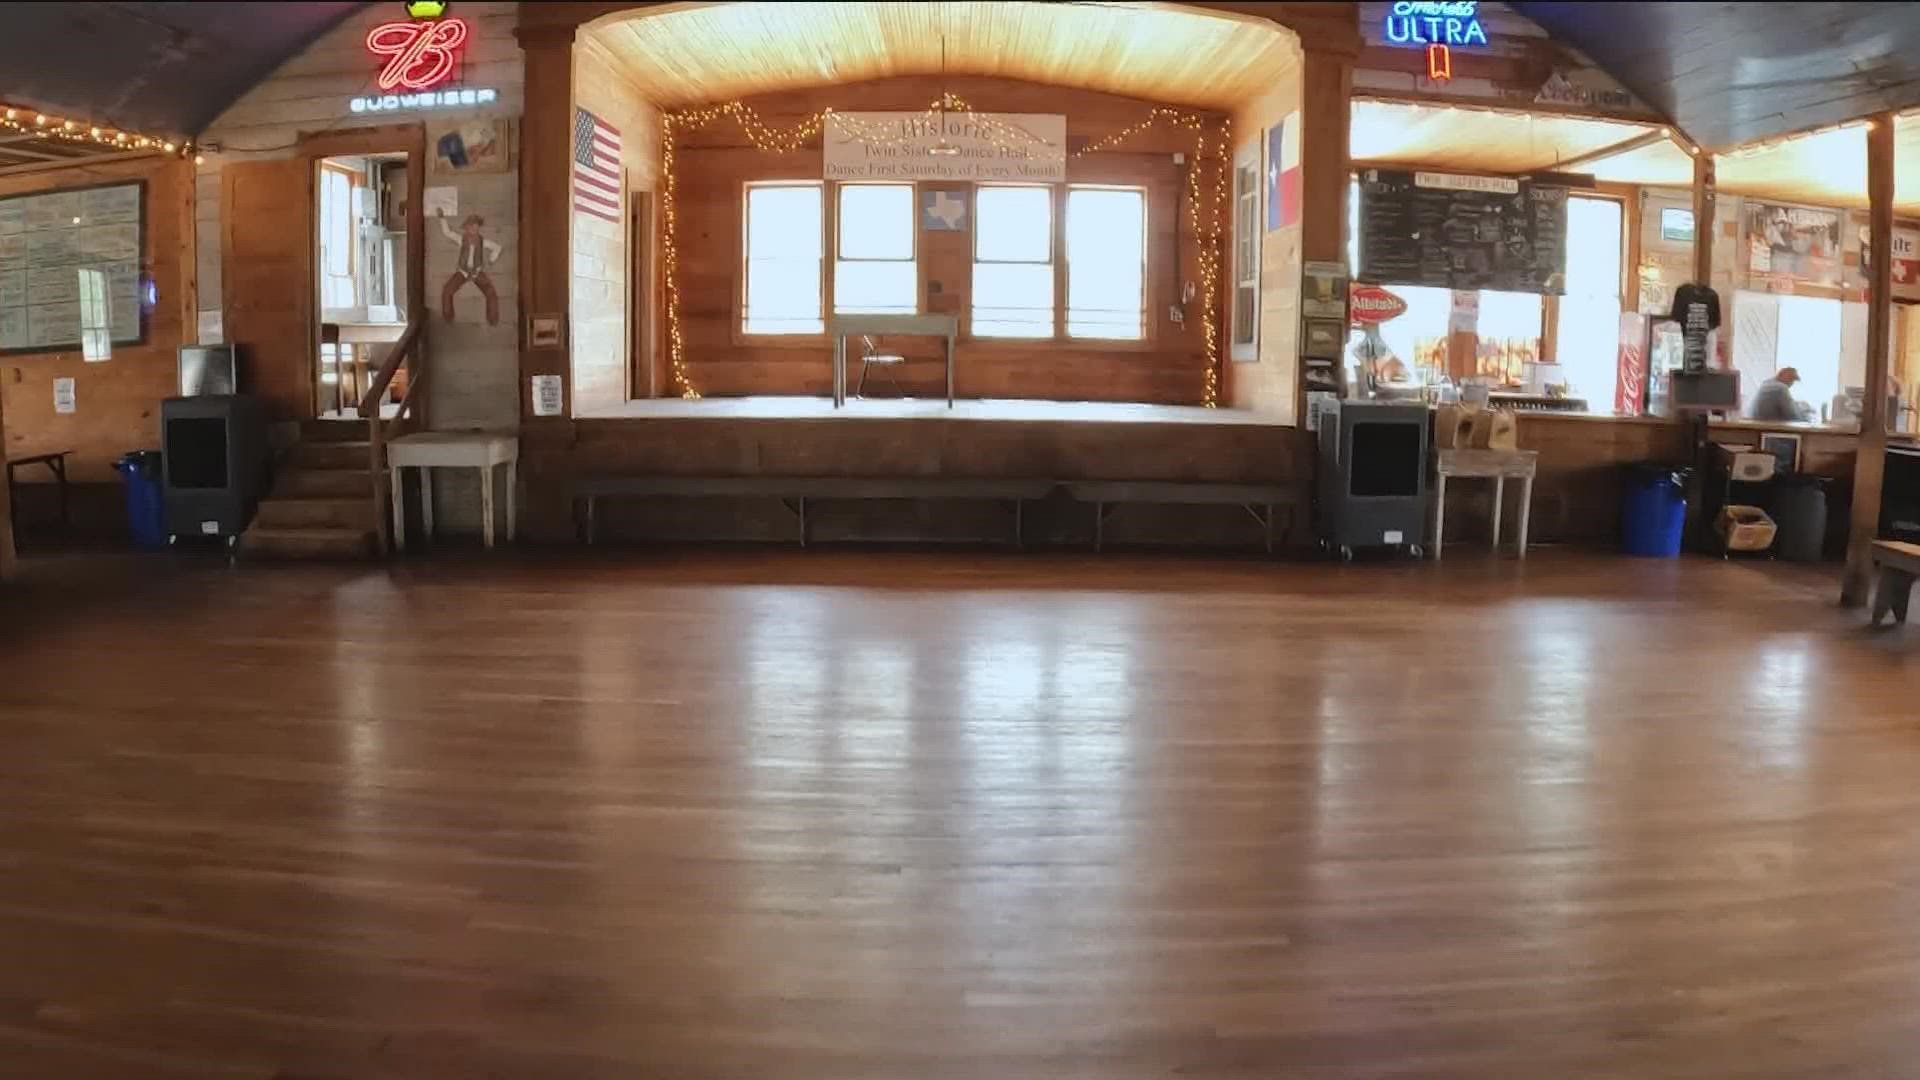 Plans to expand Highway 281 could impact a historic dance hall.